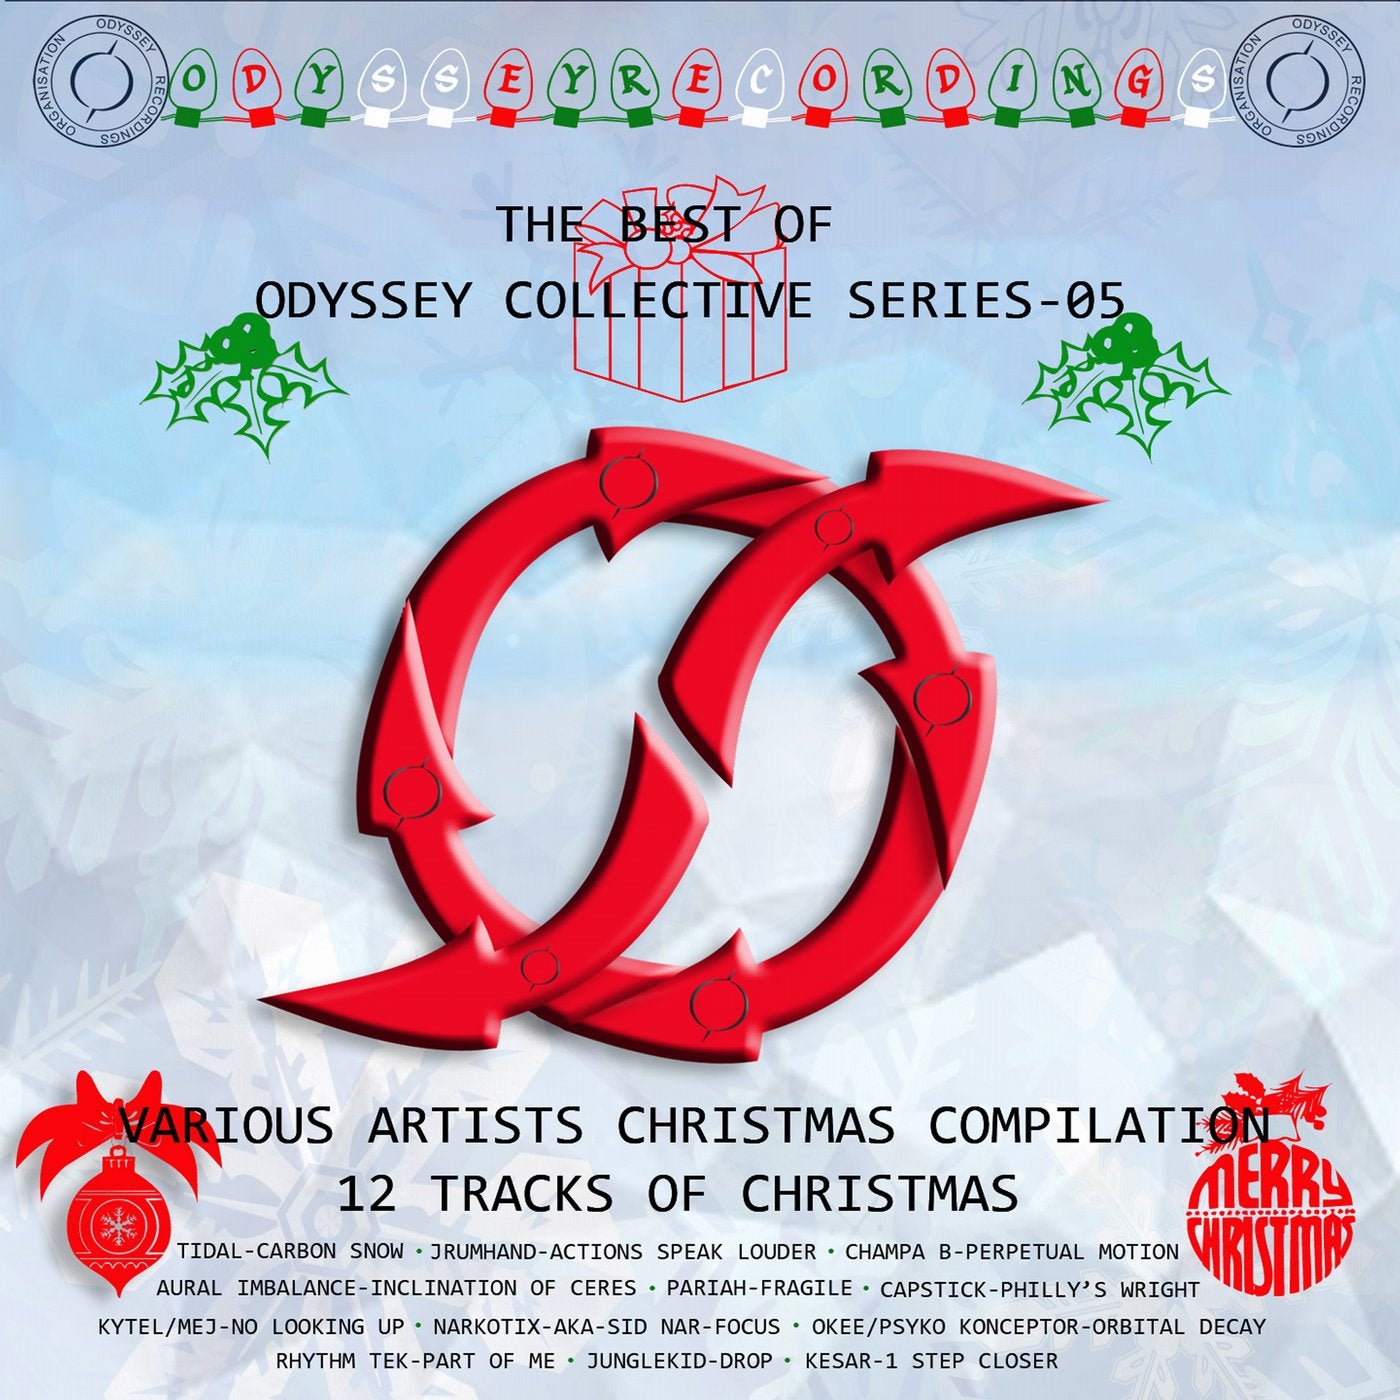 The Best Of Odyssey Collective Series 05 Christmas Compilation